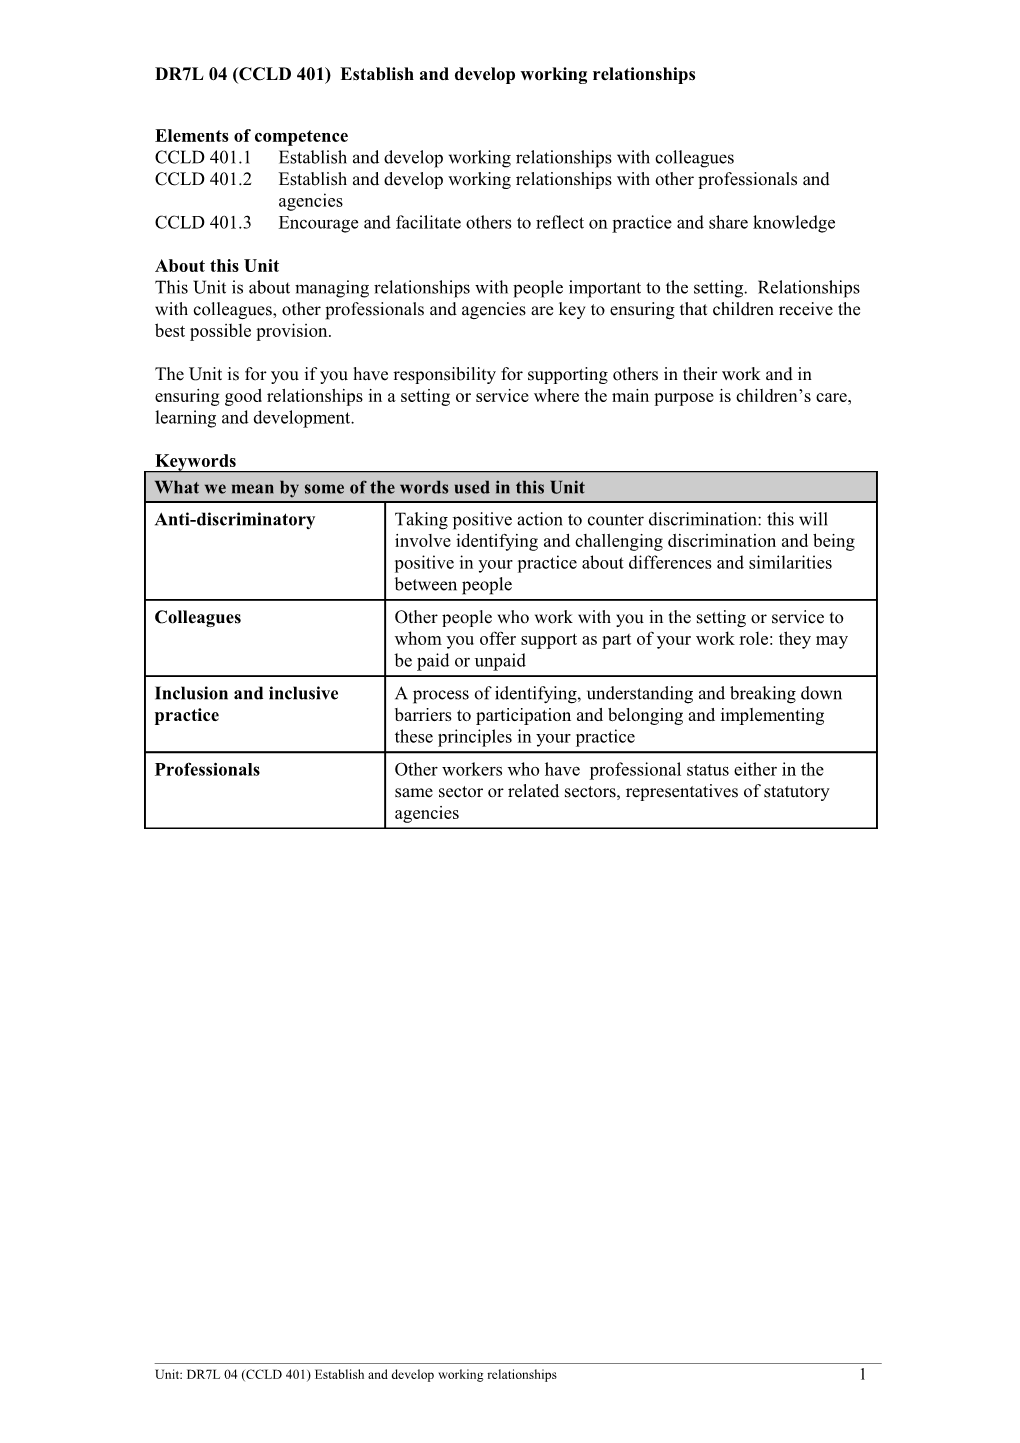 DR7L 04 (CCLD 401)Establish and Develop Working Relationships